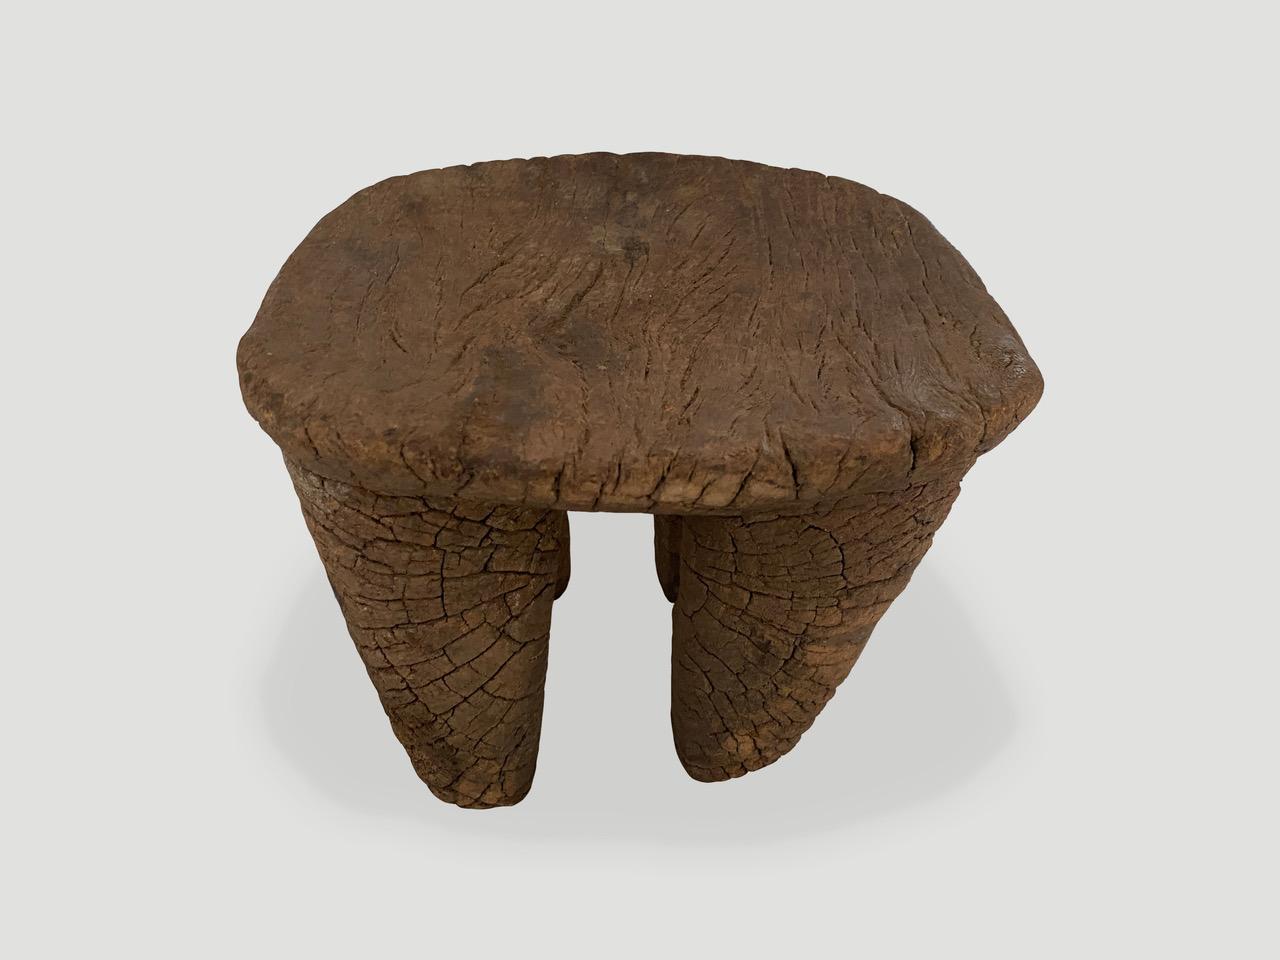 Lovely patina on this beautiful African stool or side table hand carved from a single block of wood that looks fossilized. Great for placing a book or perhaps towels in a bathroom, magazines etc. We only source the best. 

This side table or stool